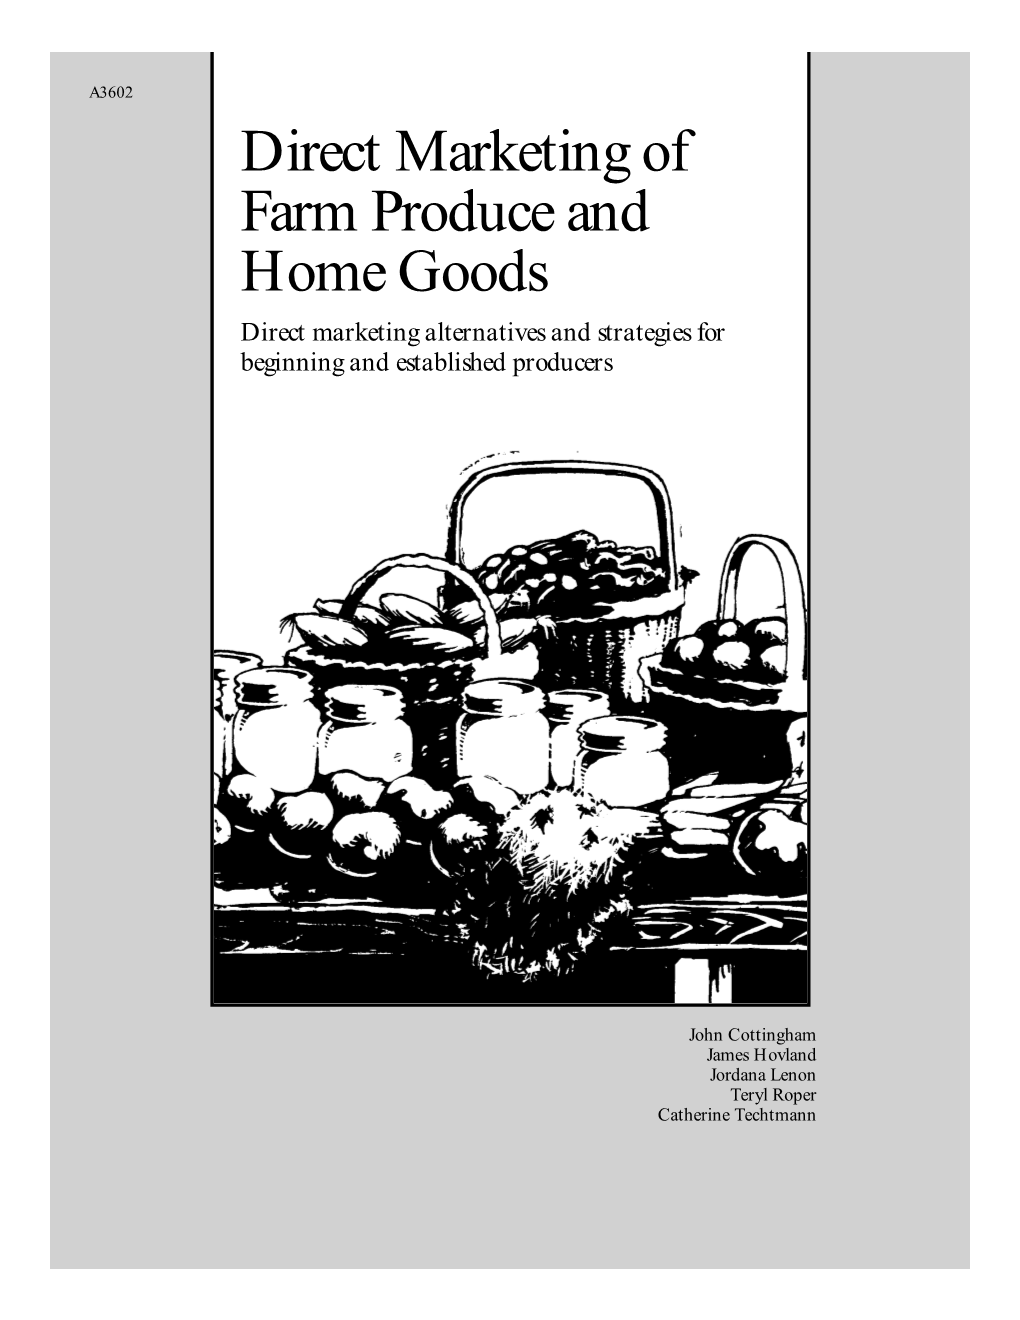 Direct Marketing of Farm Produce and Home Goods Direct Marketing Alternatives and Strategies for Beginning and Established Producers